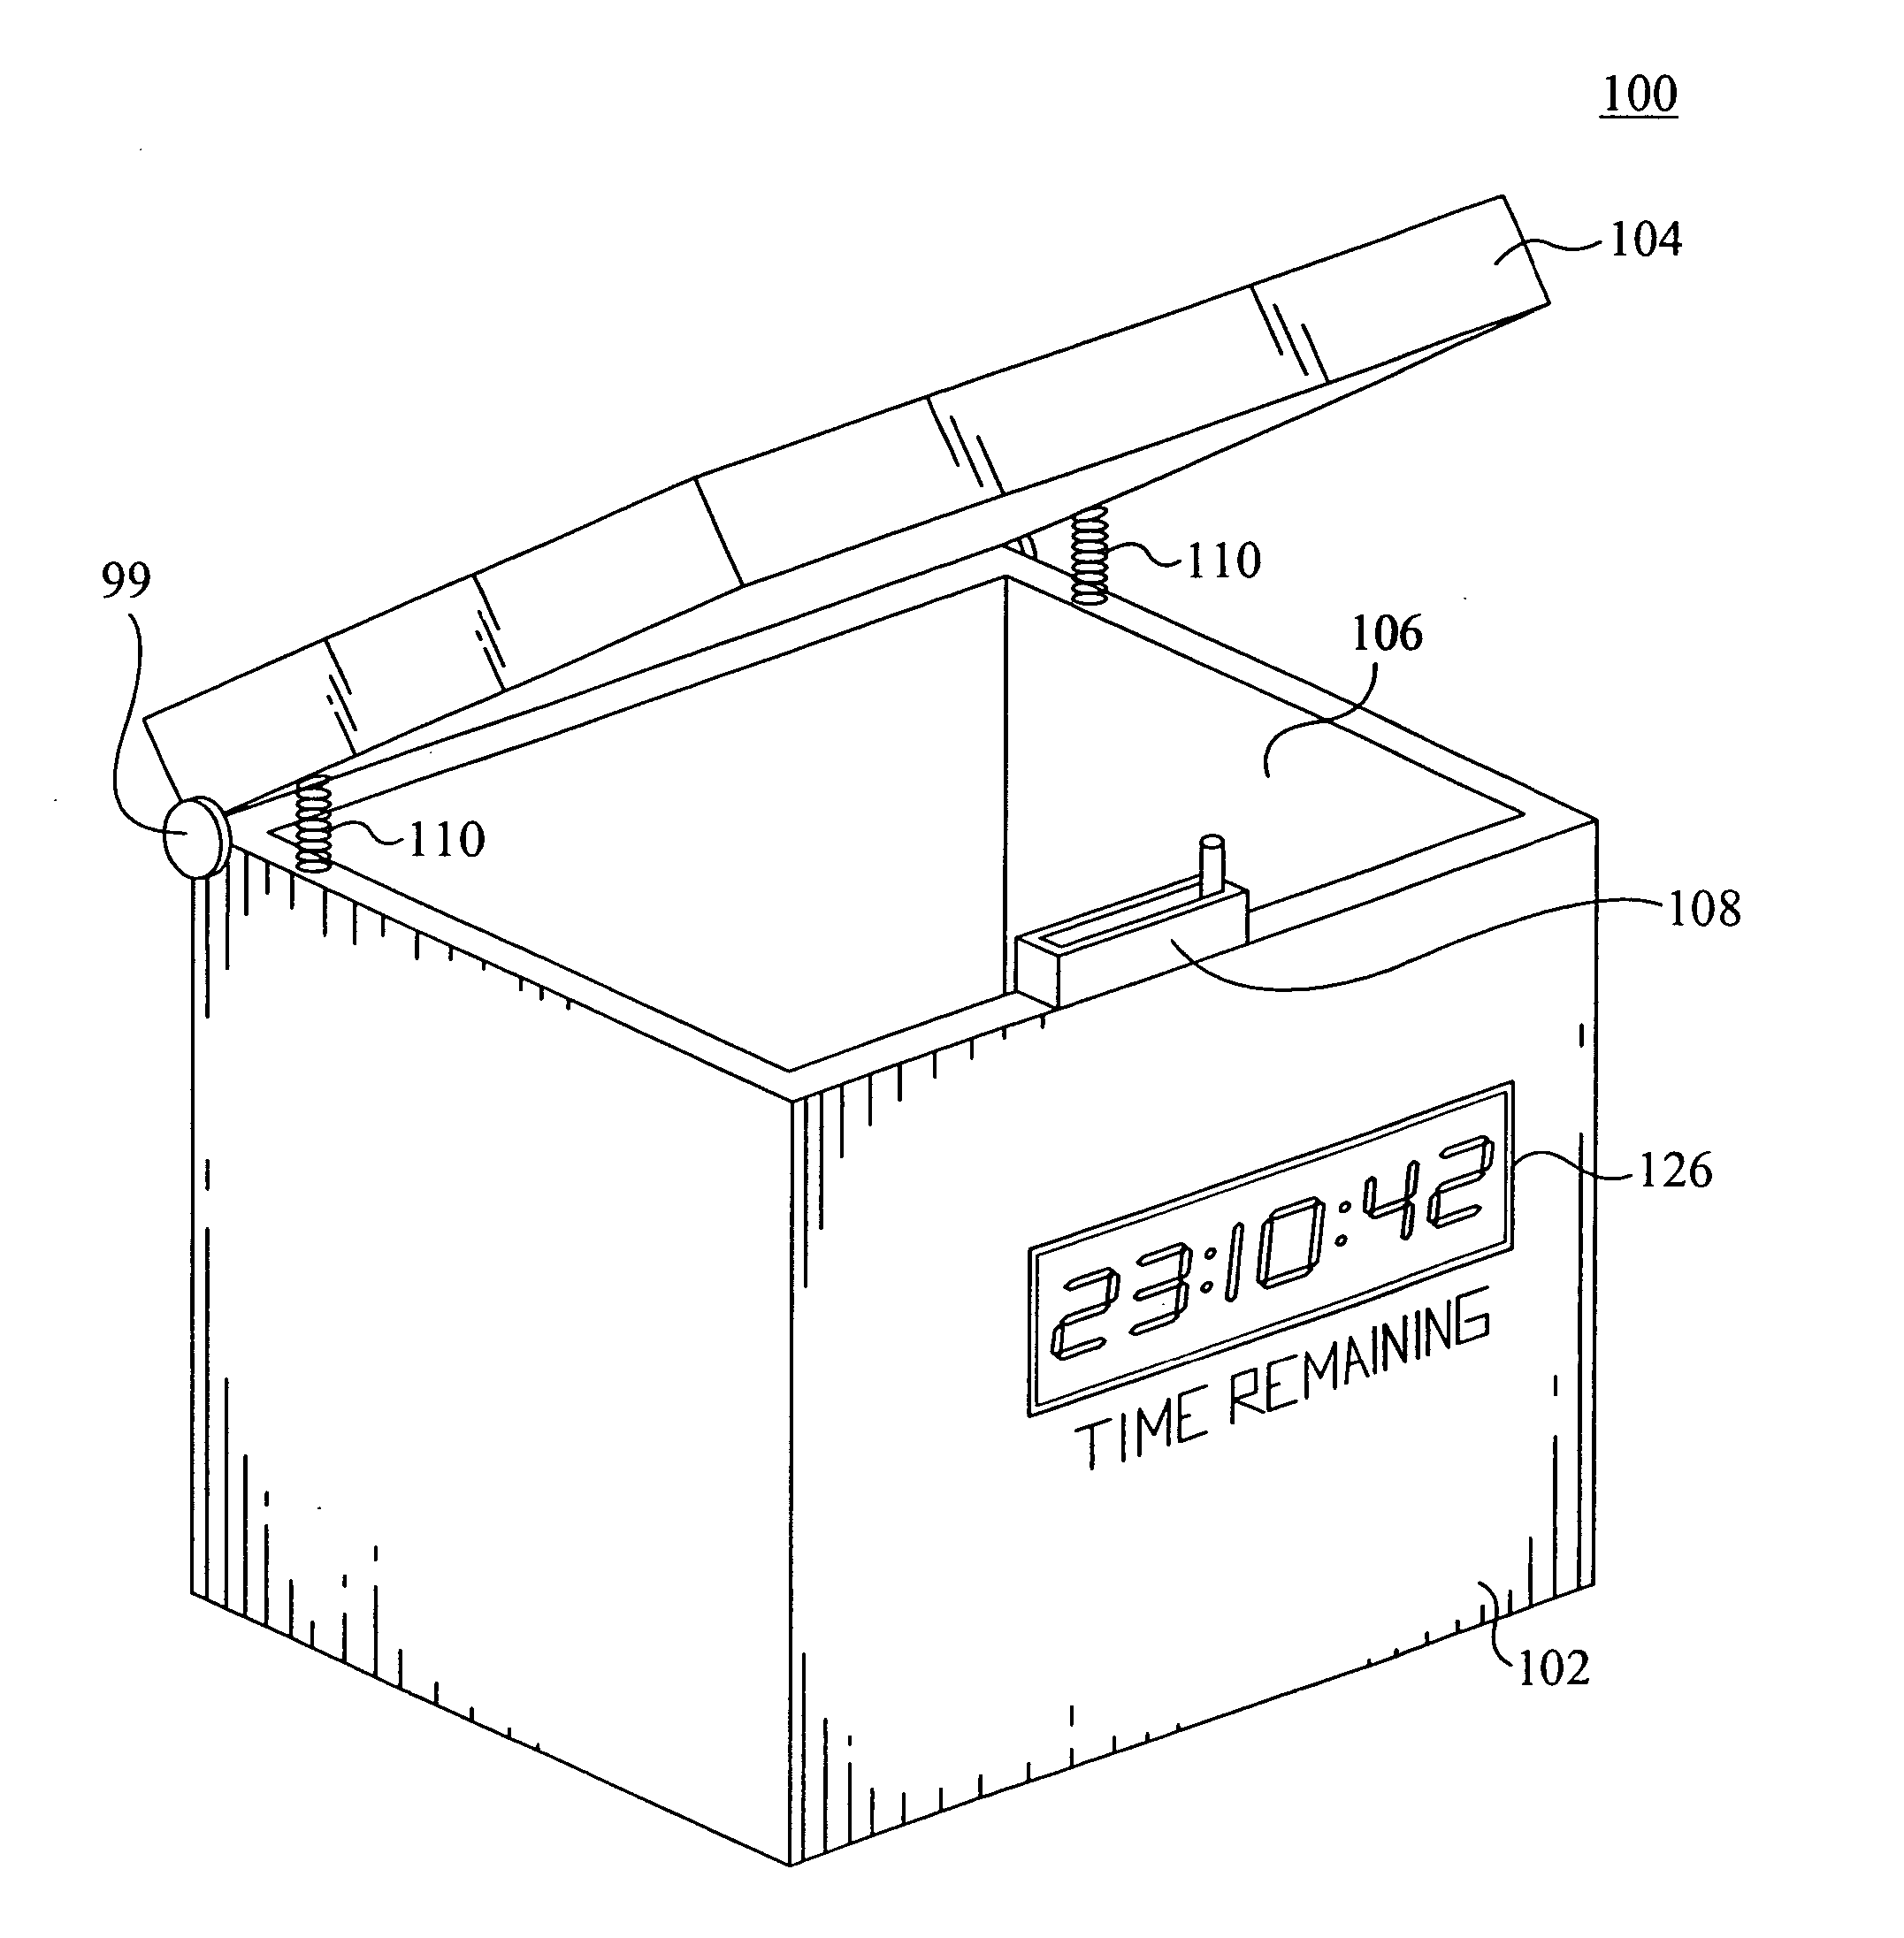 Container with a selective opening and closing mechanism